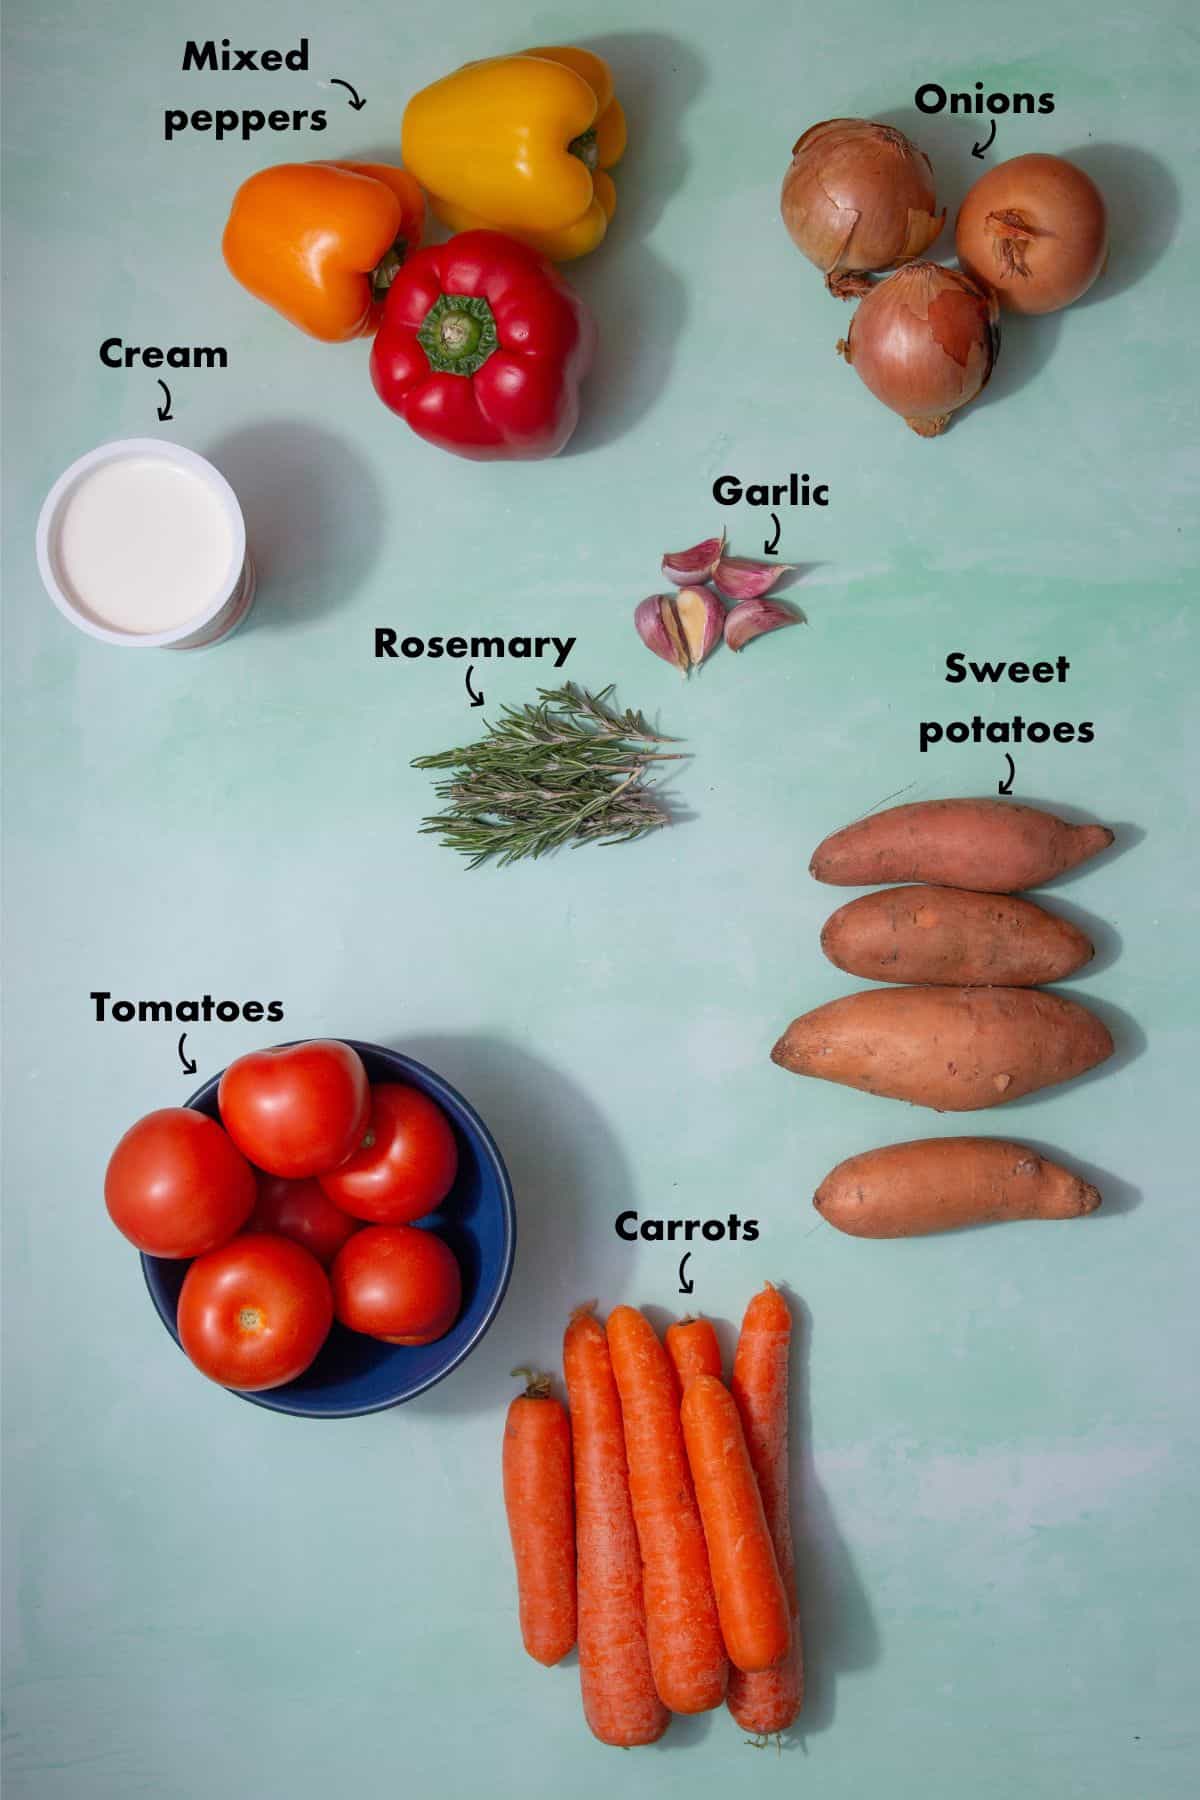 Ingredients to make a vegetable soup laid out on a pale blue background and labelled.